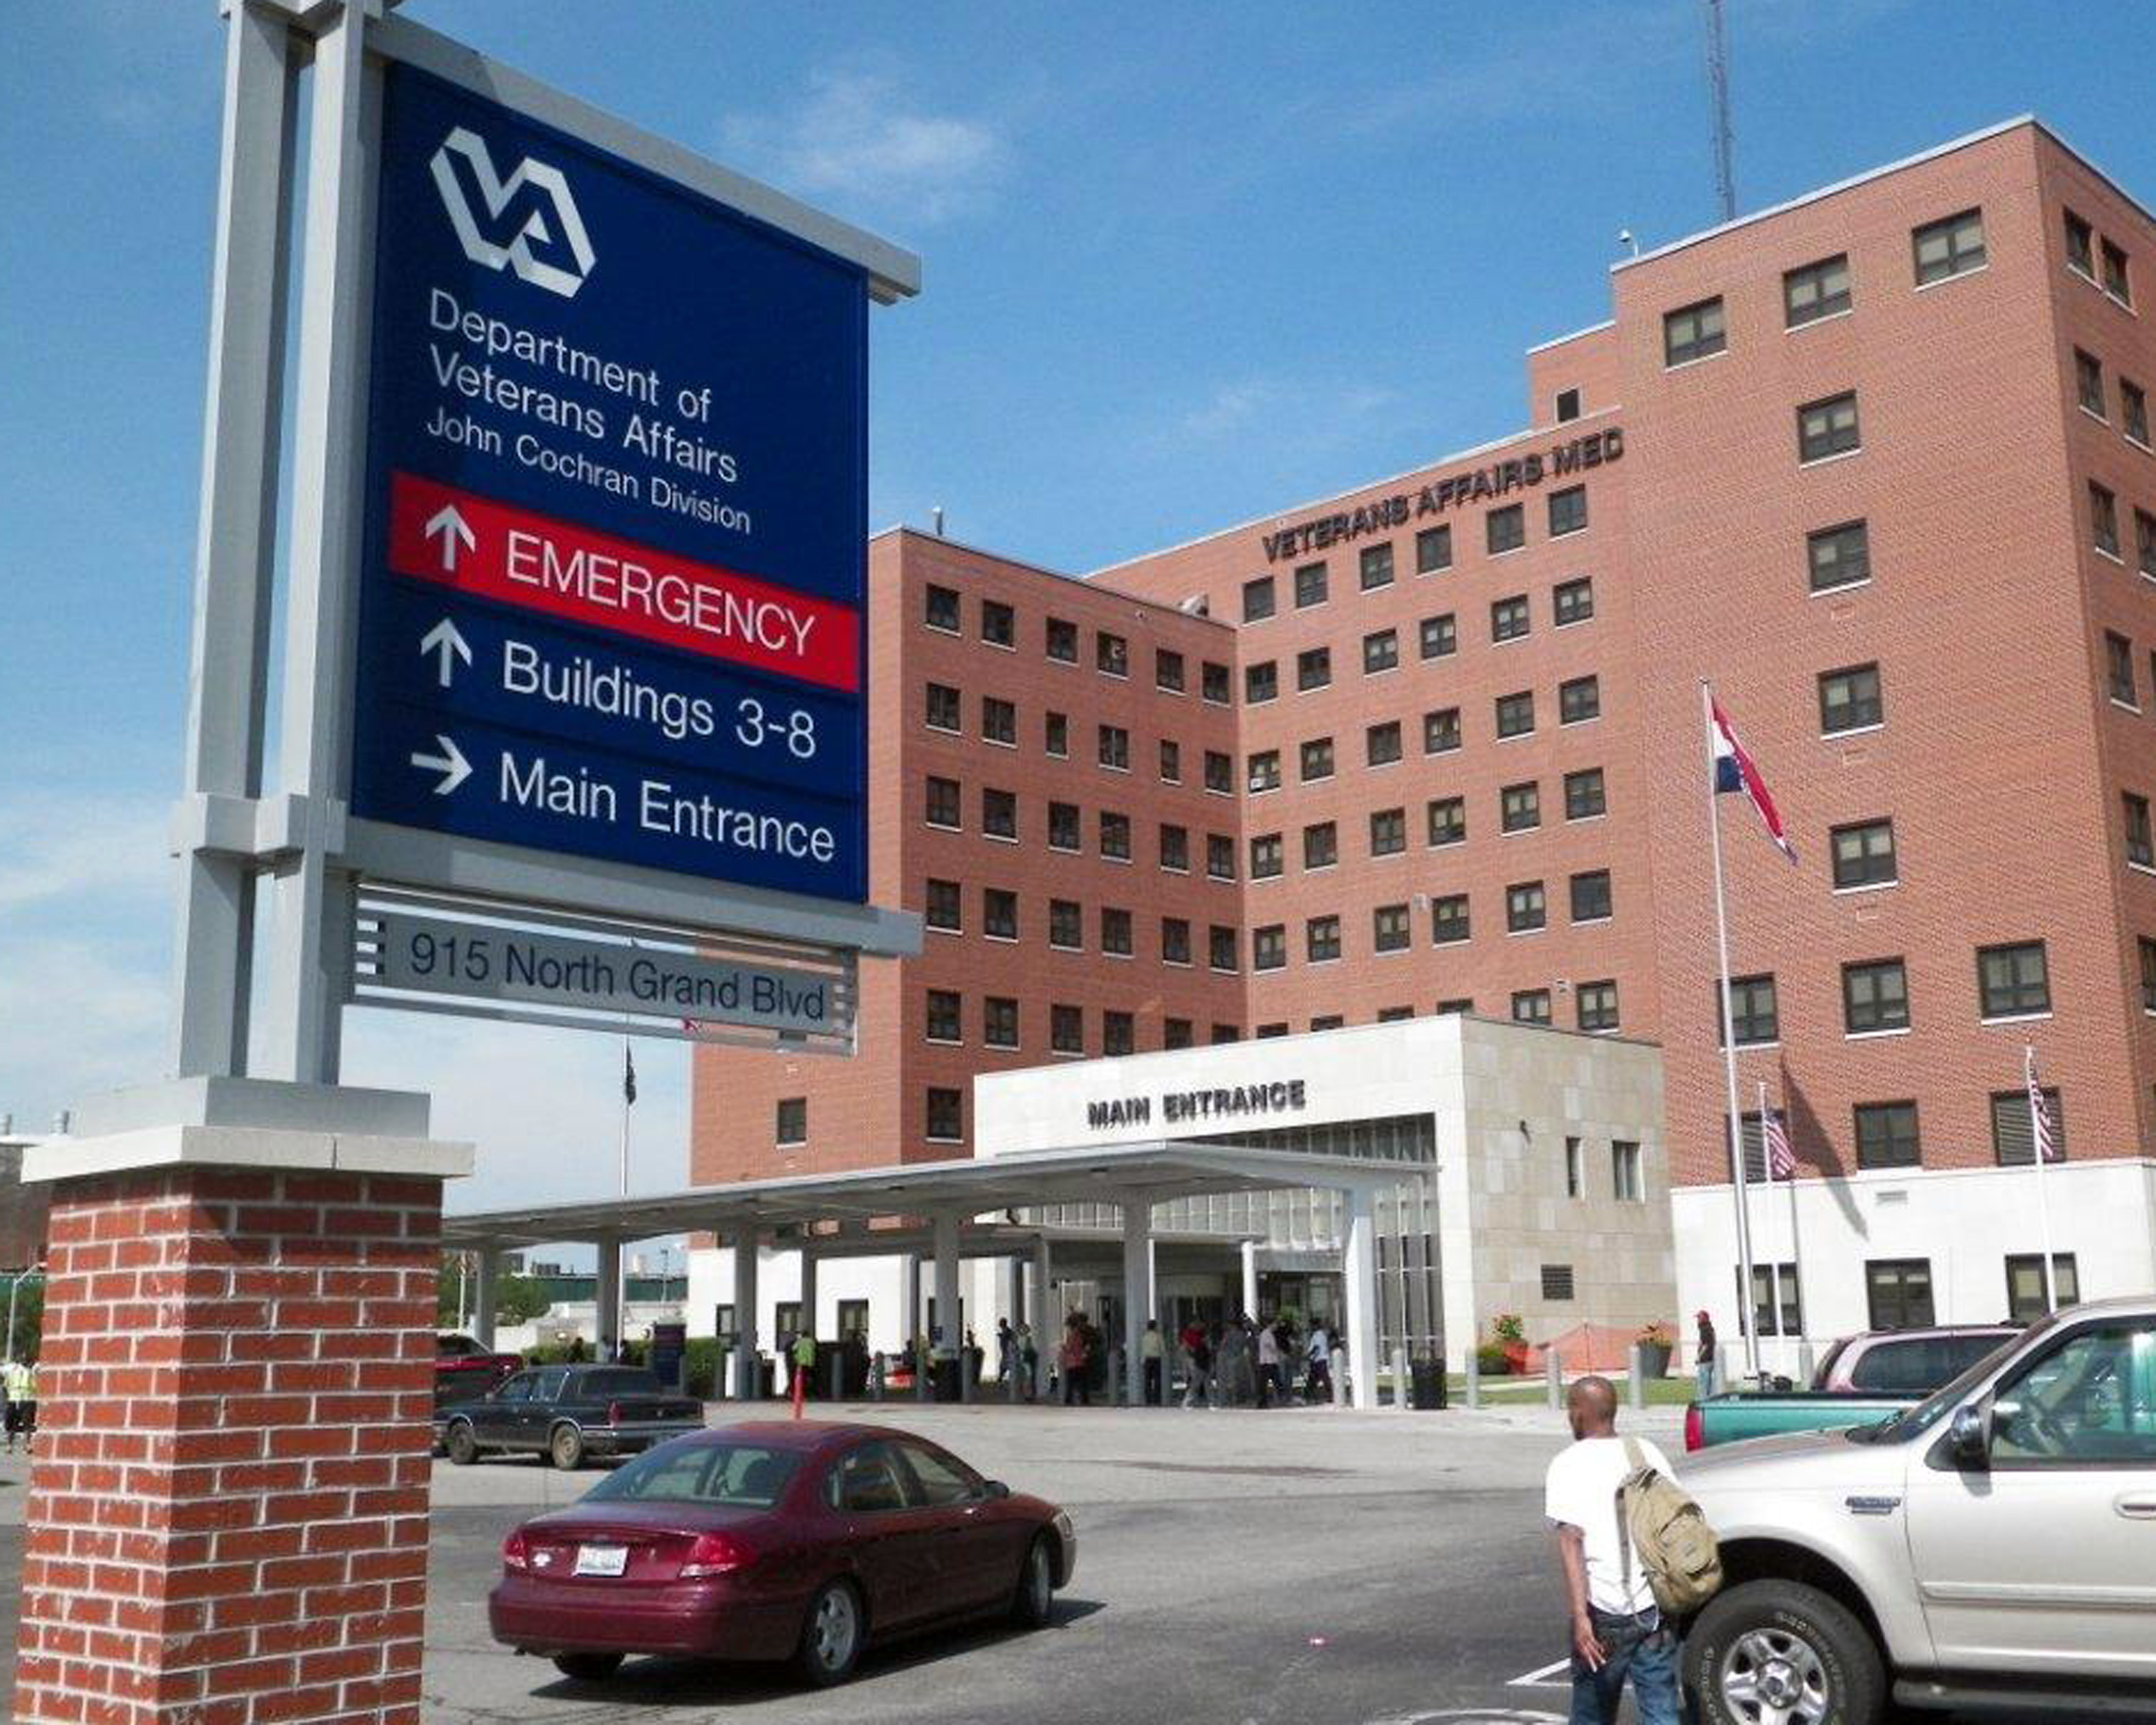 FILE - This May 28, 2014, file photo shows the St. Louis VA Medical Center in St. Louis. According to a report released Tuesday, Dec. 13, 2016, by the VA Office of Inspector General, St. Louis Veterans Administration health care officials insufficiently investigated the death of a mental health patient who killed himself. (AP Photo/Jim Salter, File)